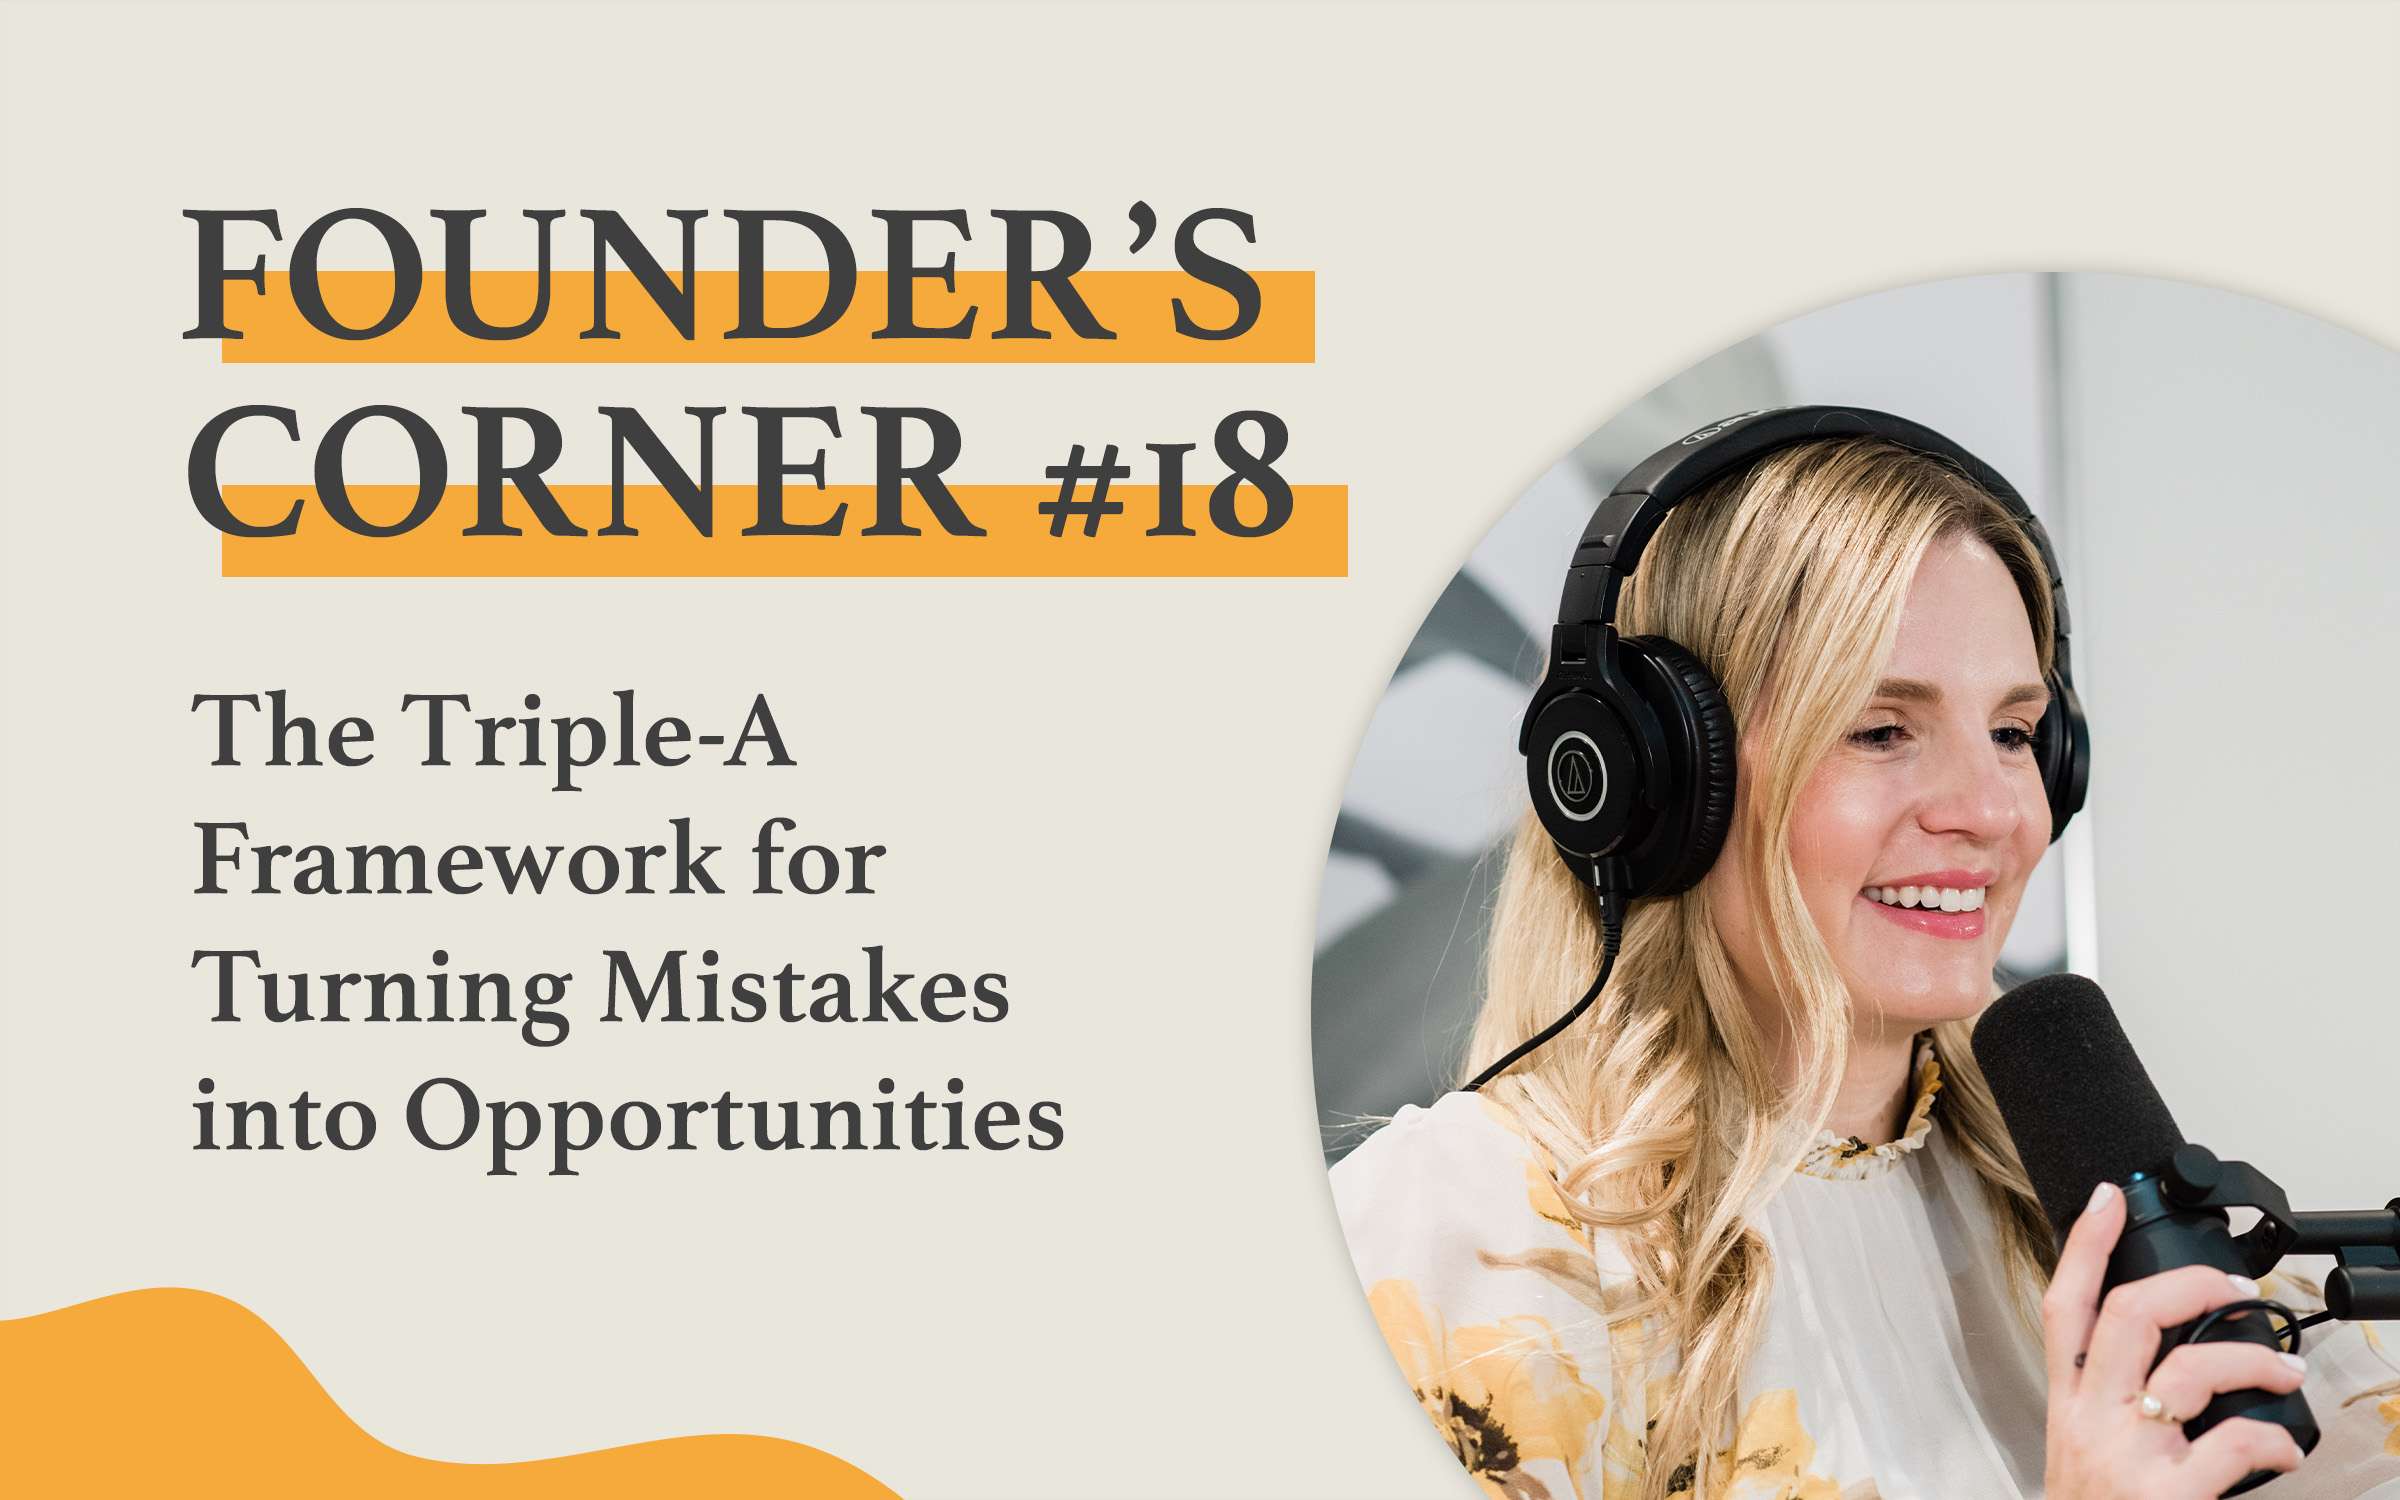 Turning Mistakes into Opportunities